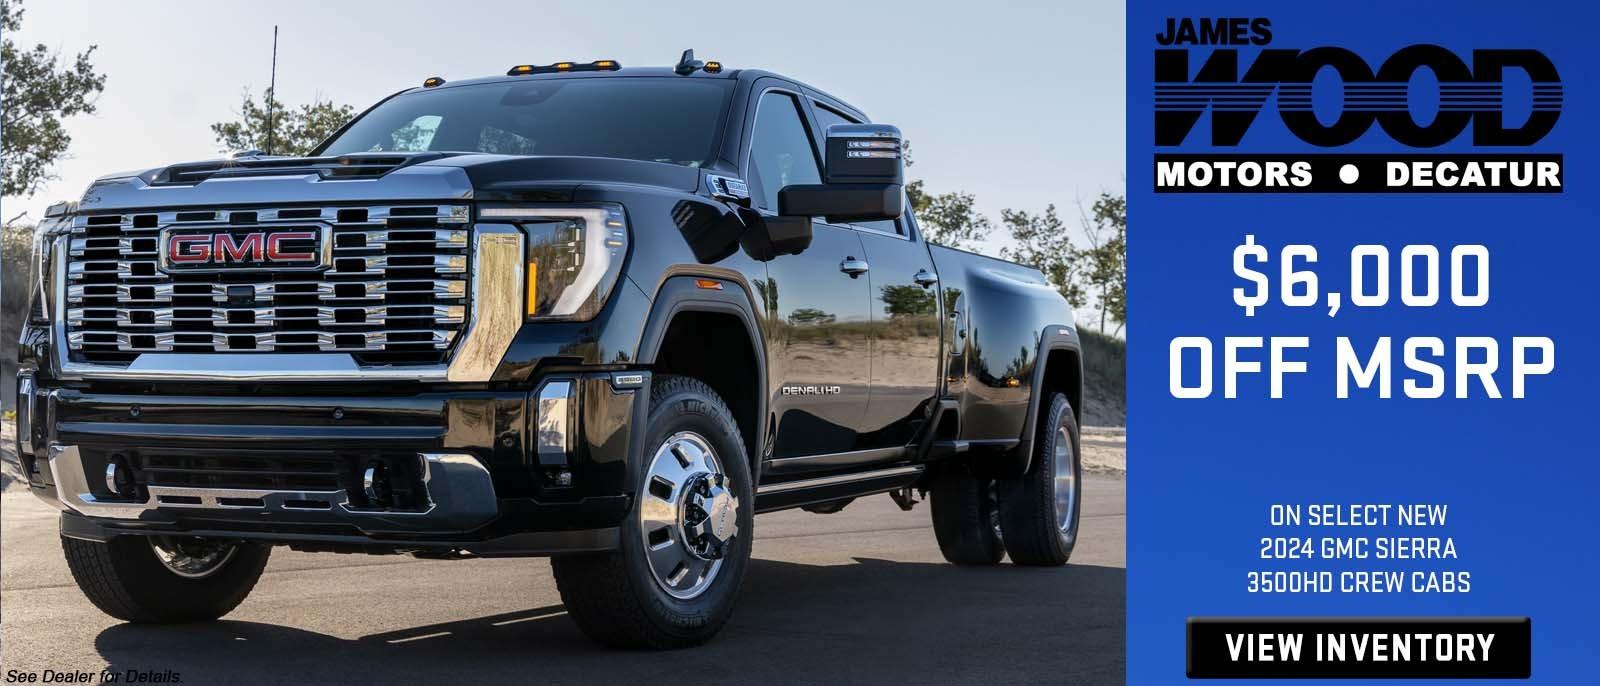 $6,000 Off MSRP on select new 2024 GMC Sierra 3500HD Crew Cabs at James Wood Decatur Ft Worth Texas